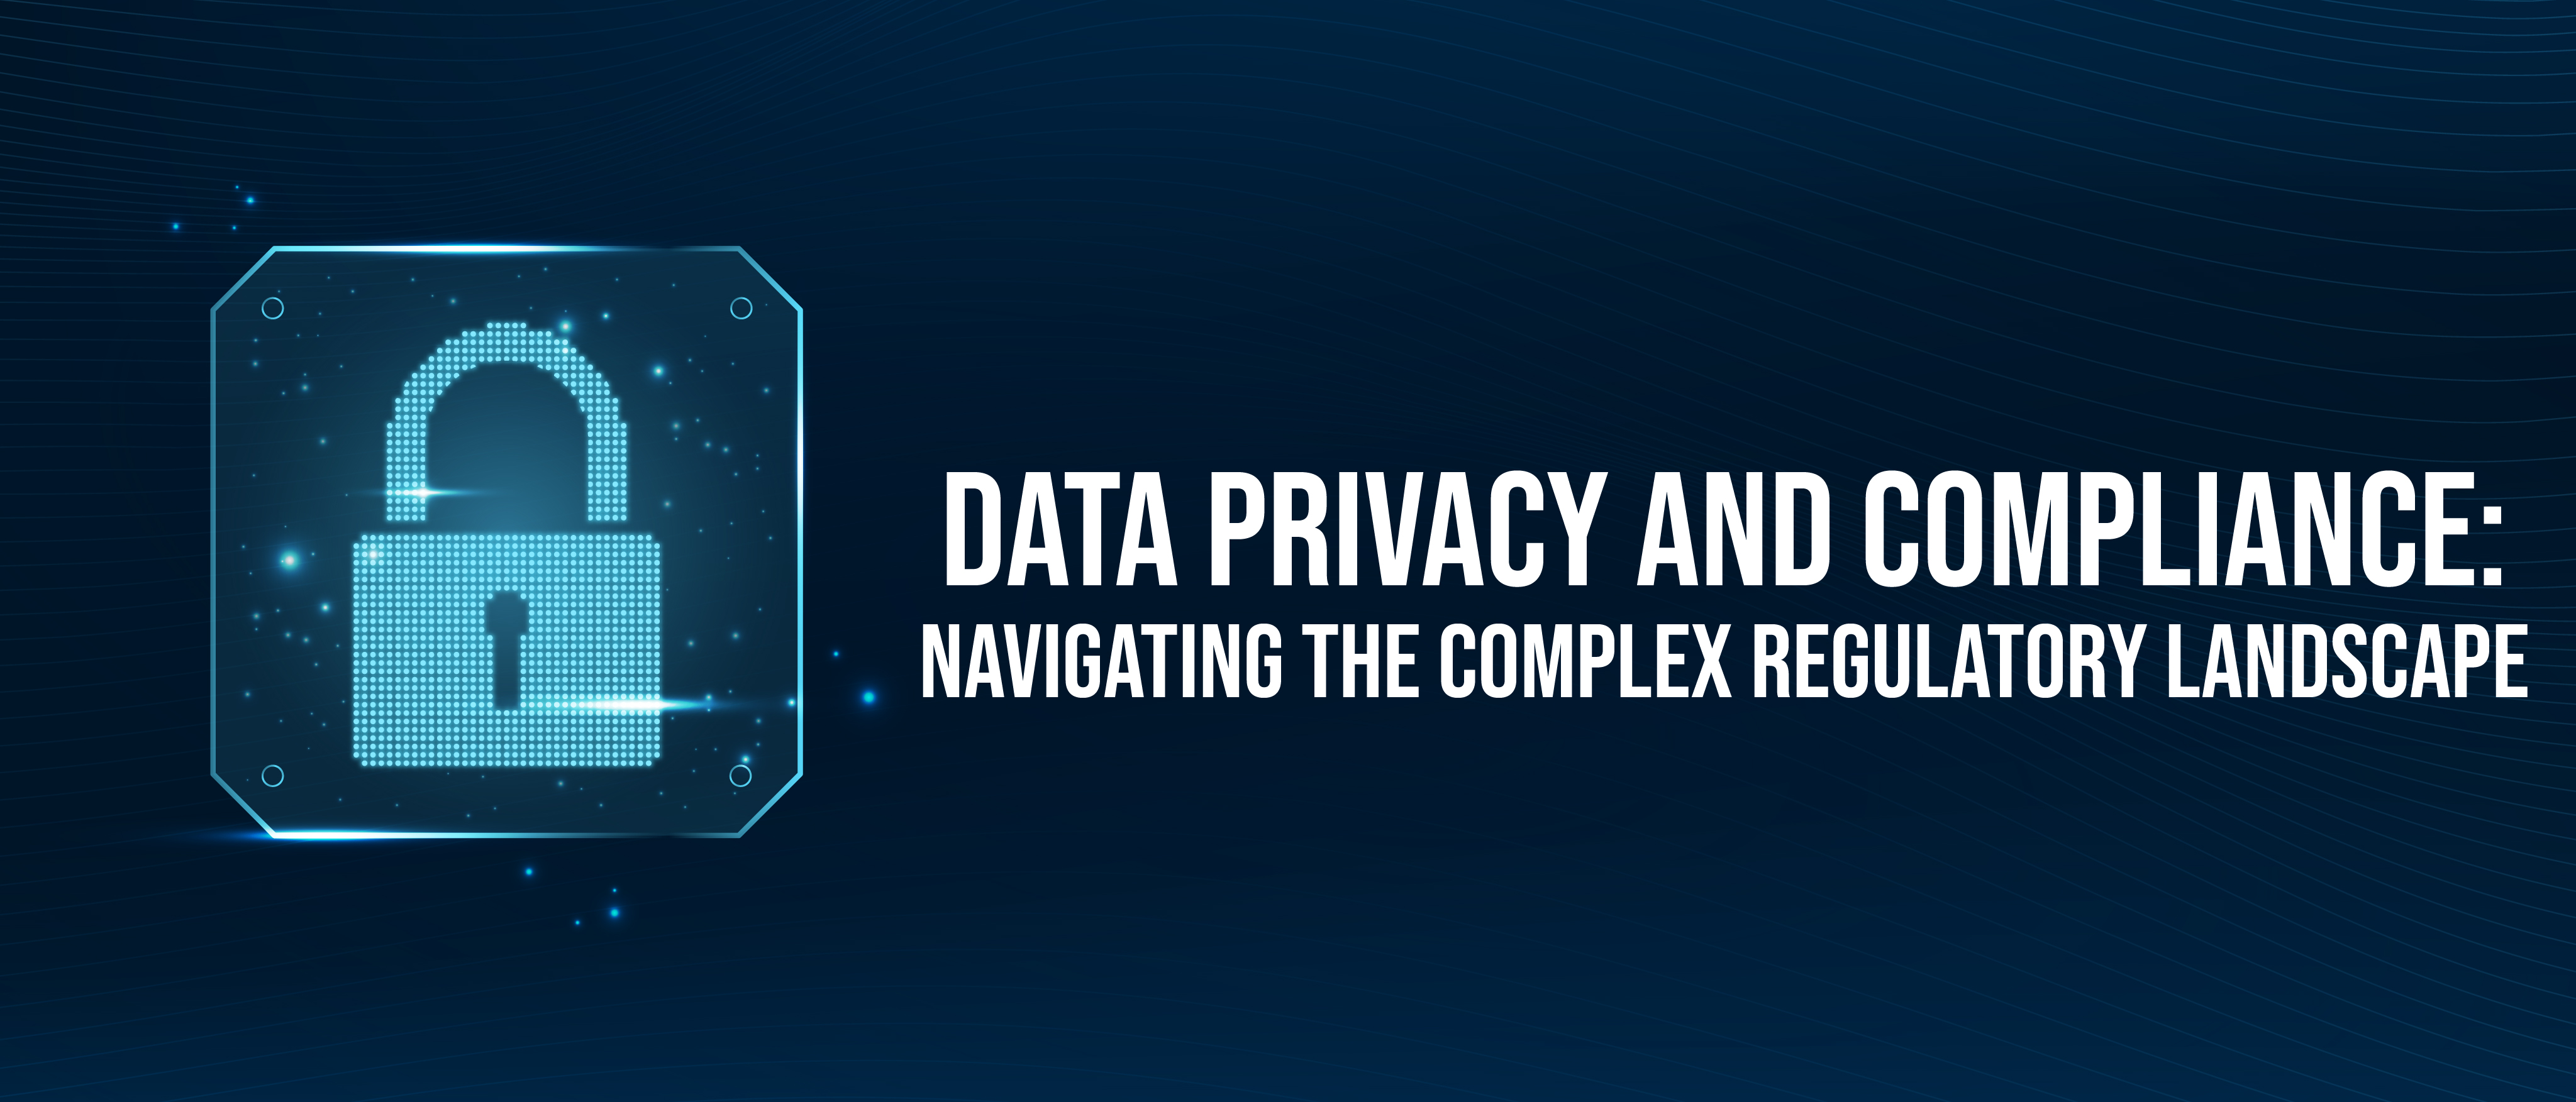 Data Privacy and Compliance_Navigating the Complex Regulatory Landscape